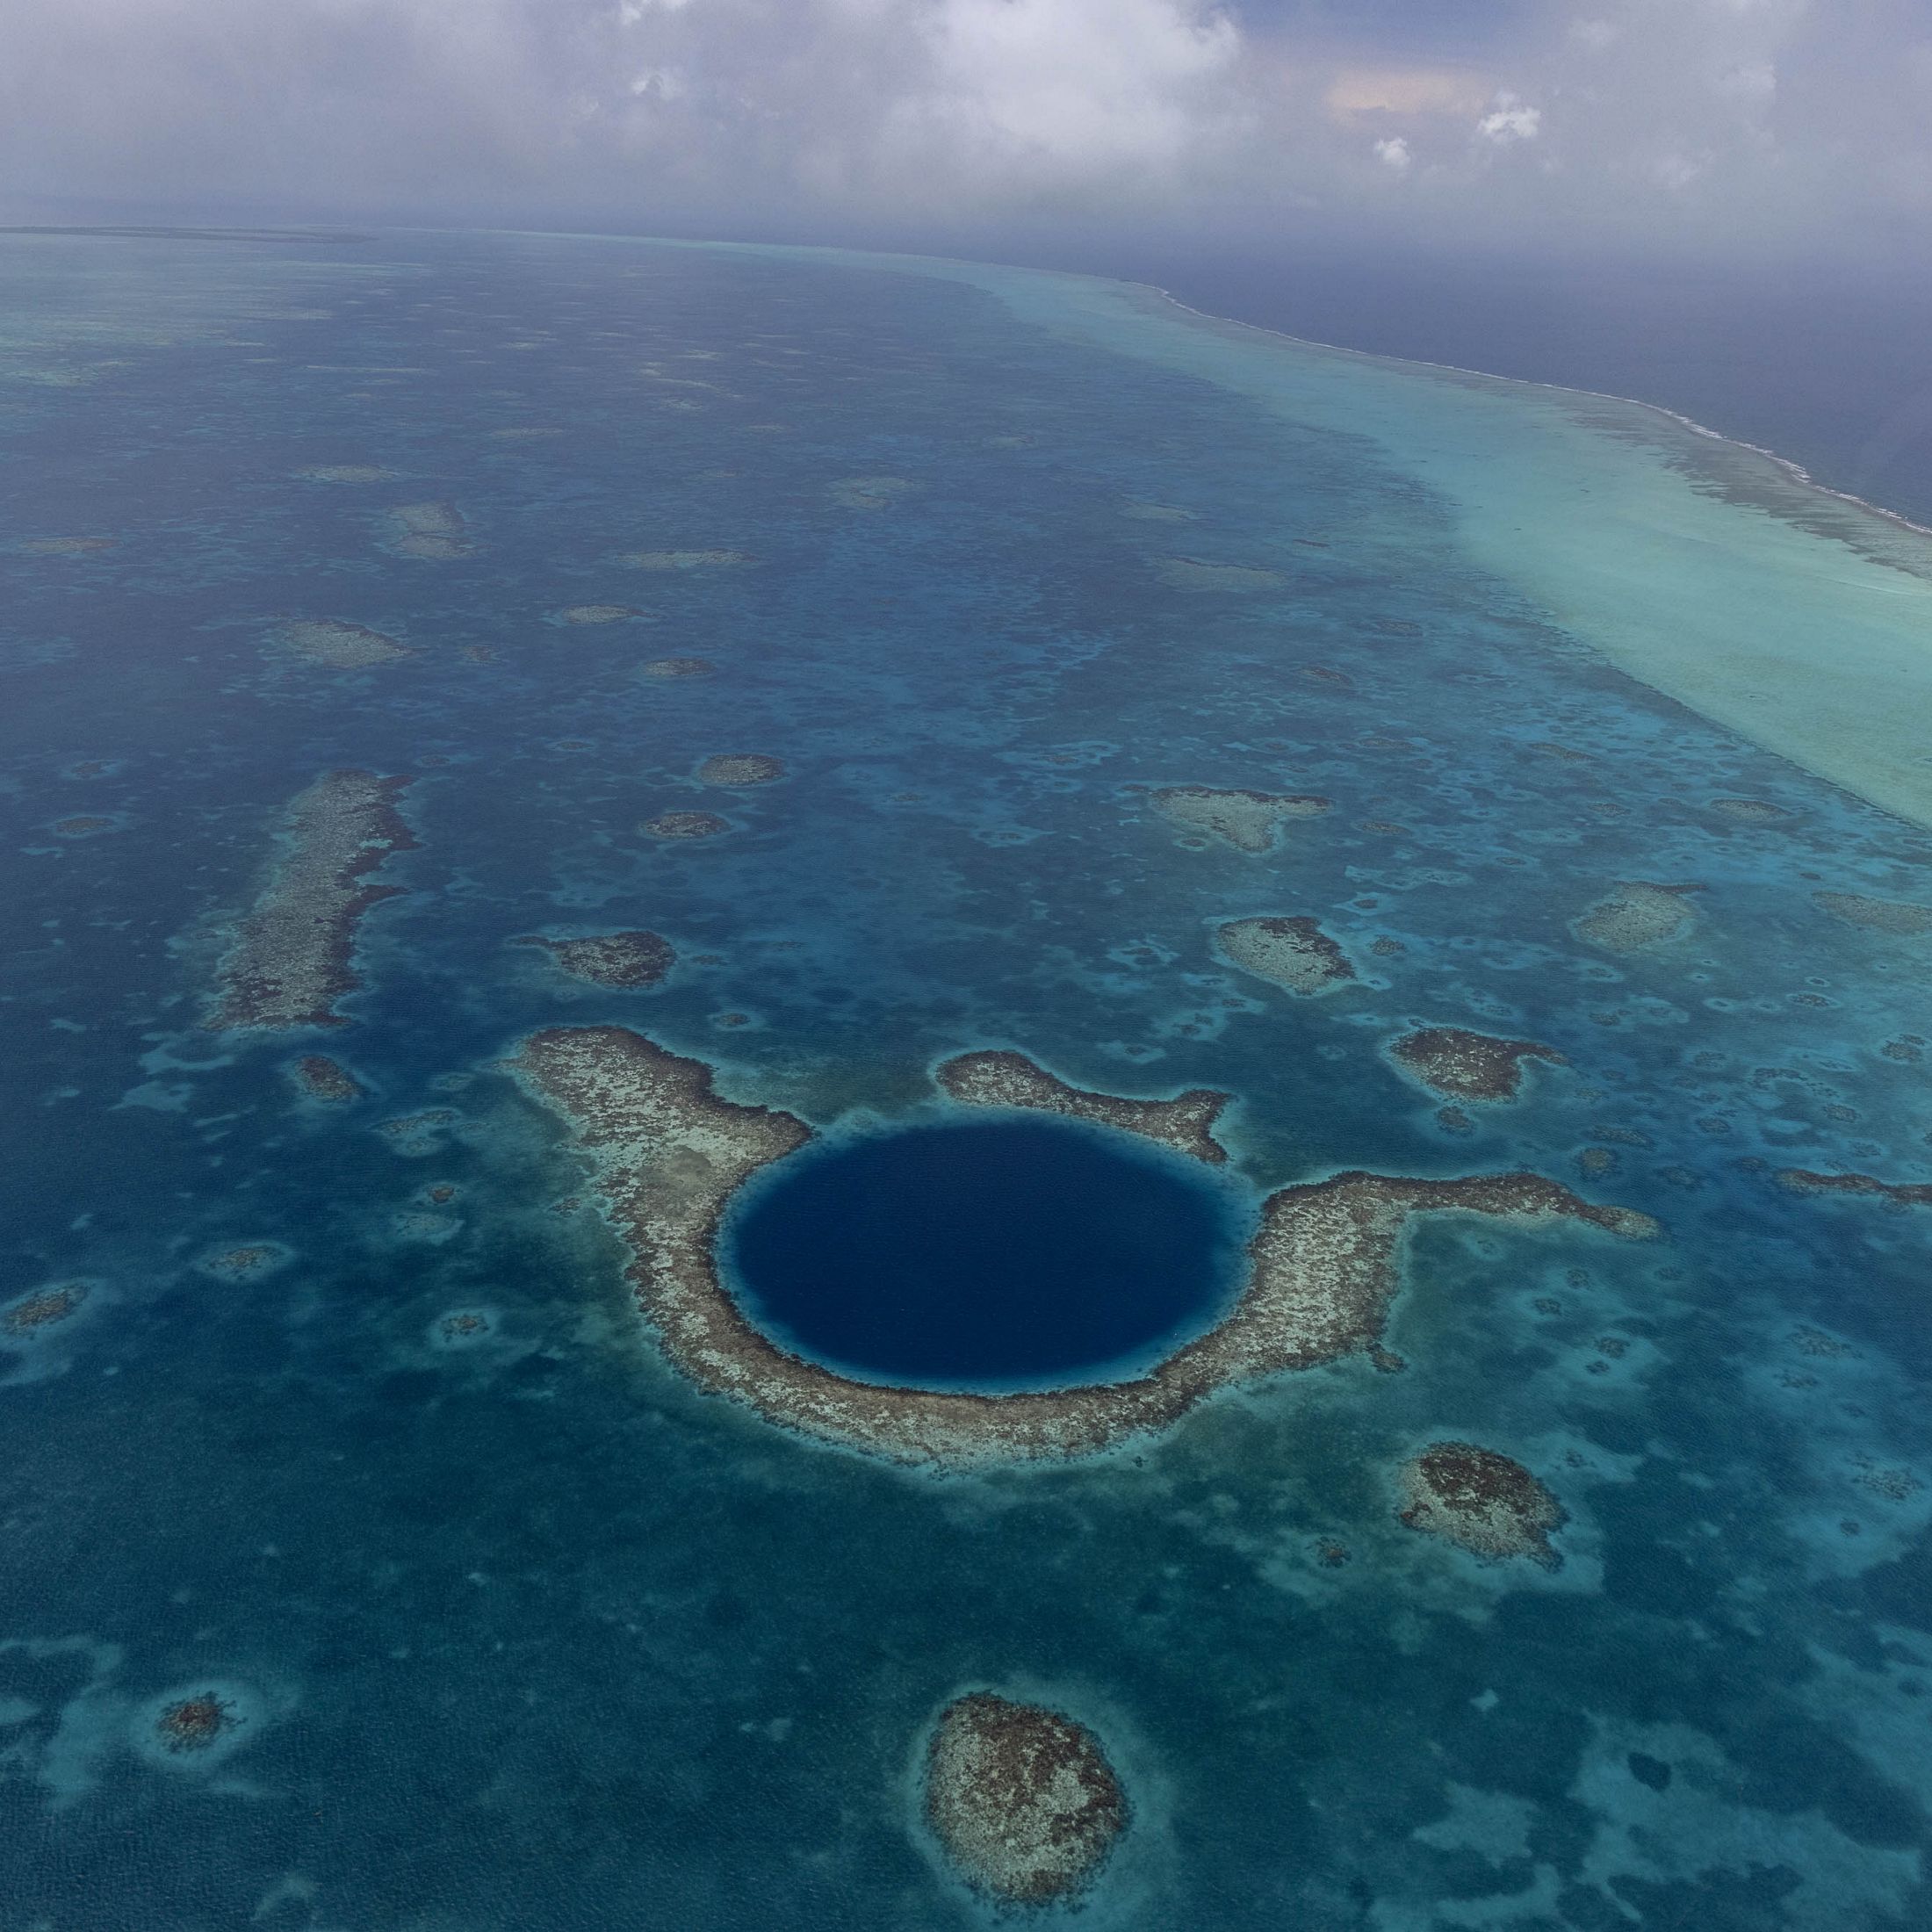 The Great Blue Hole is a circle of darker blue off the coast of Belize.